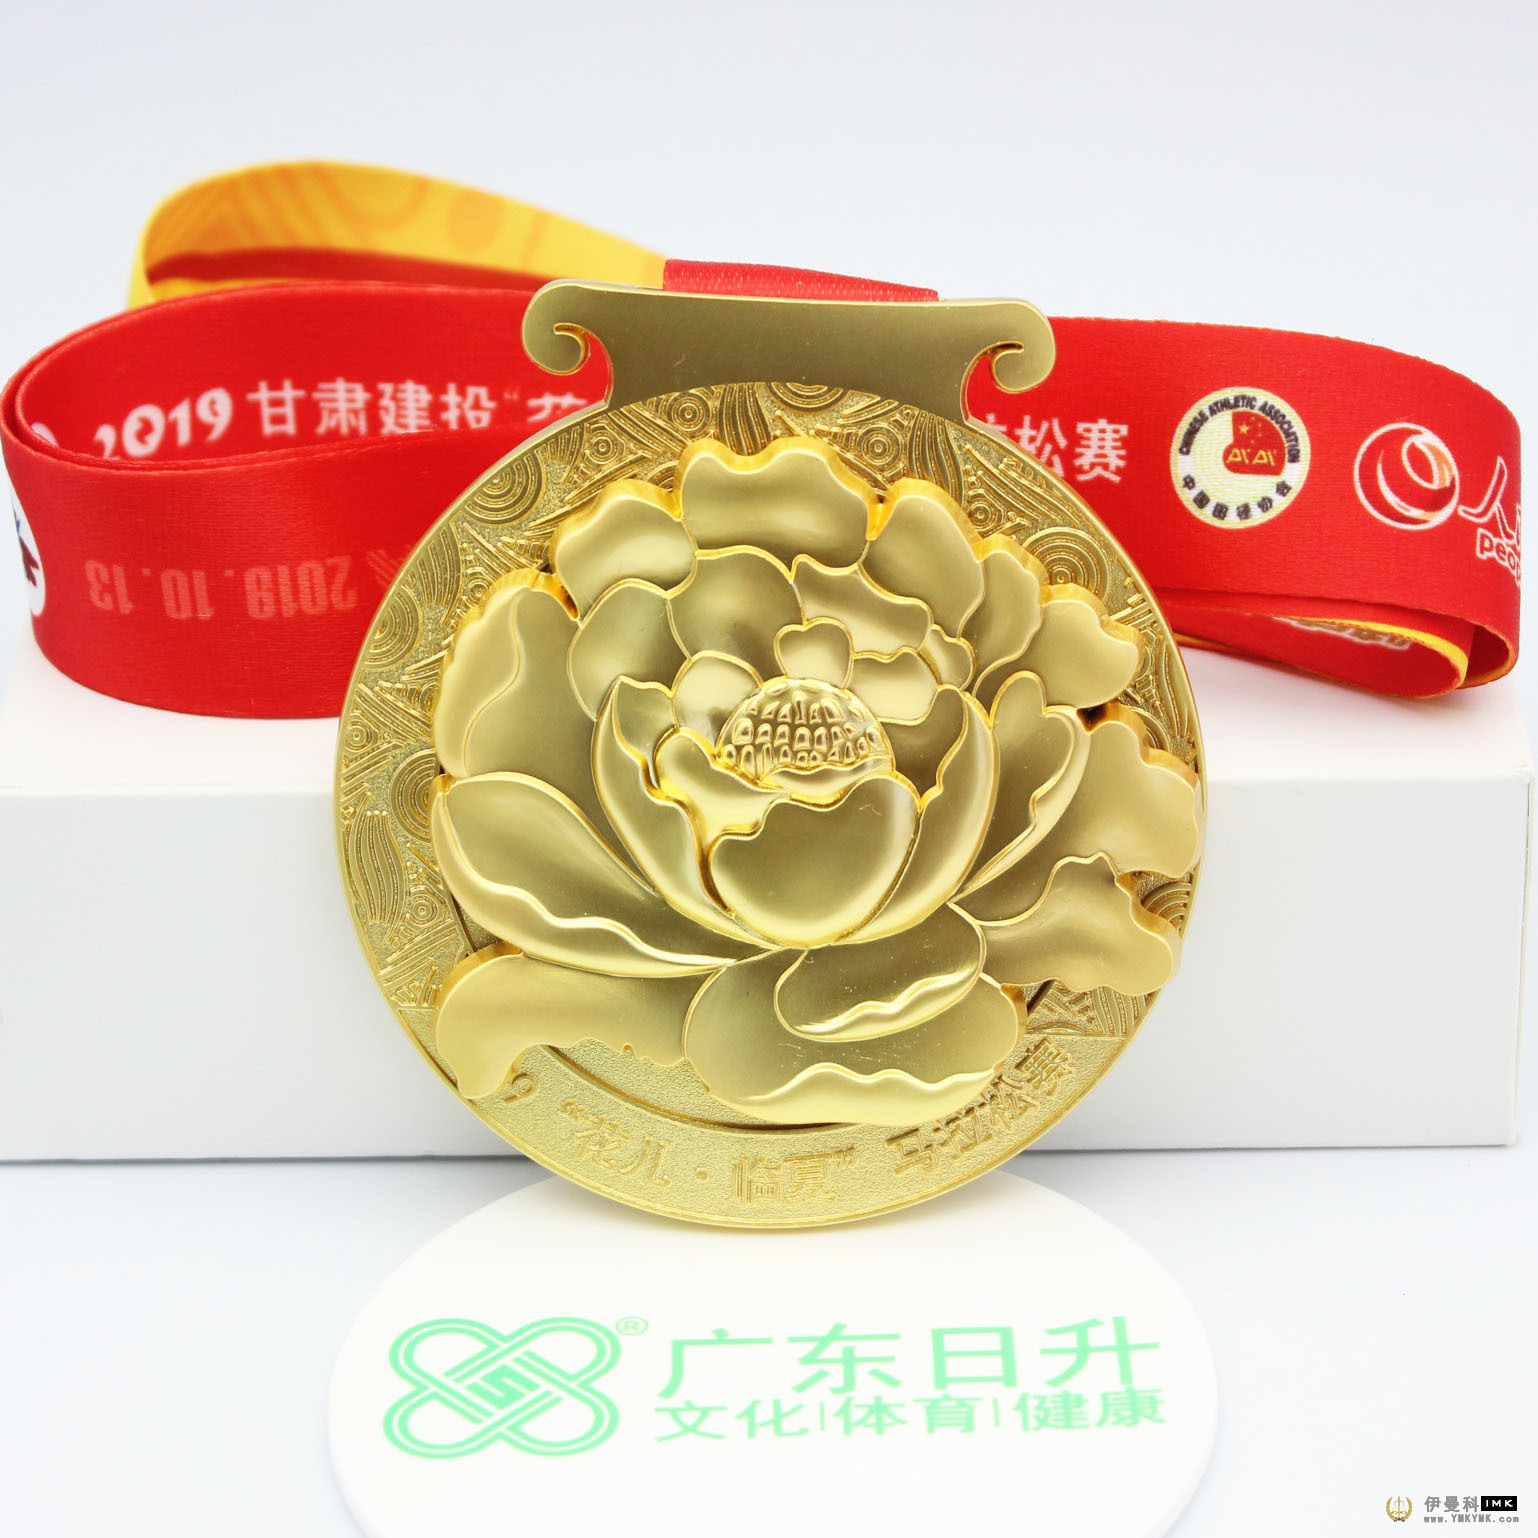 What is the design of the marathon medals of major events? news 图4张